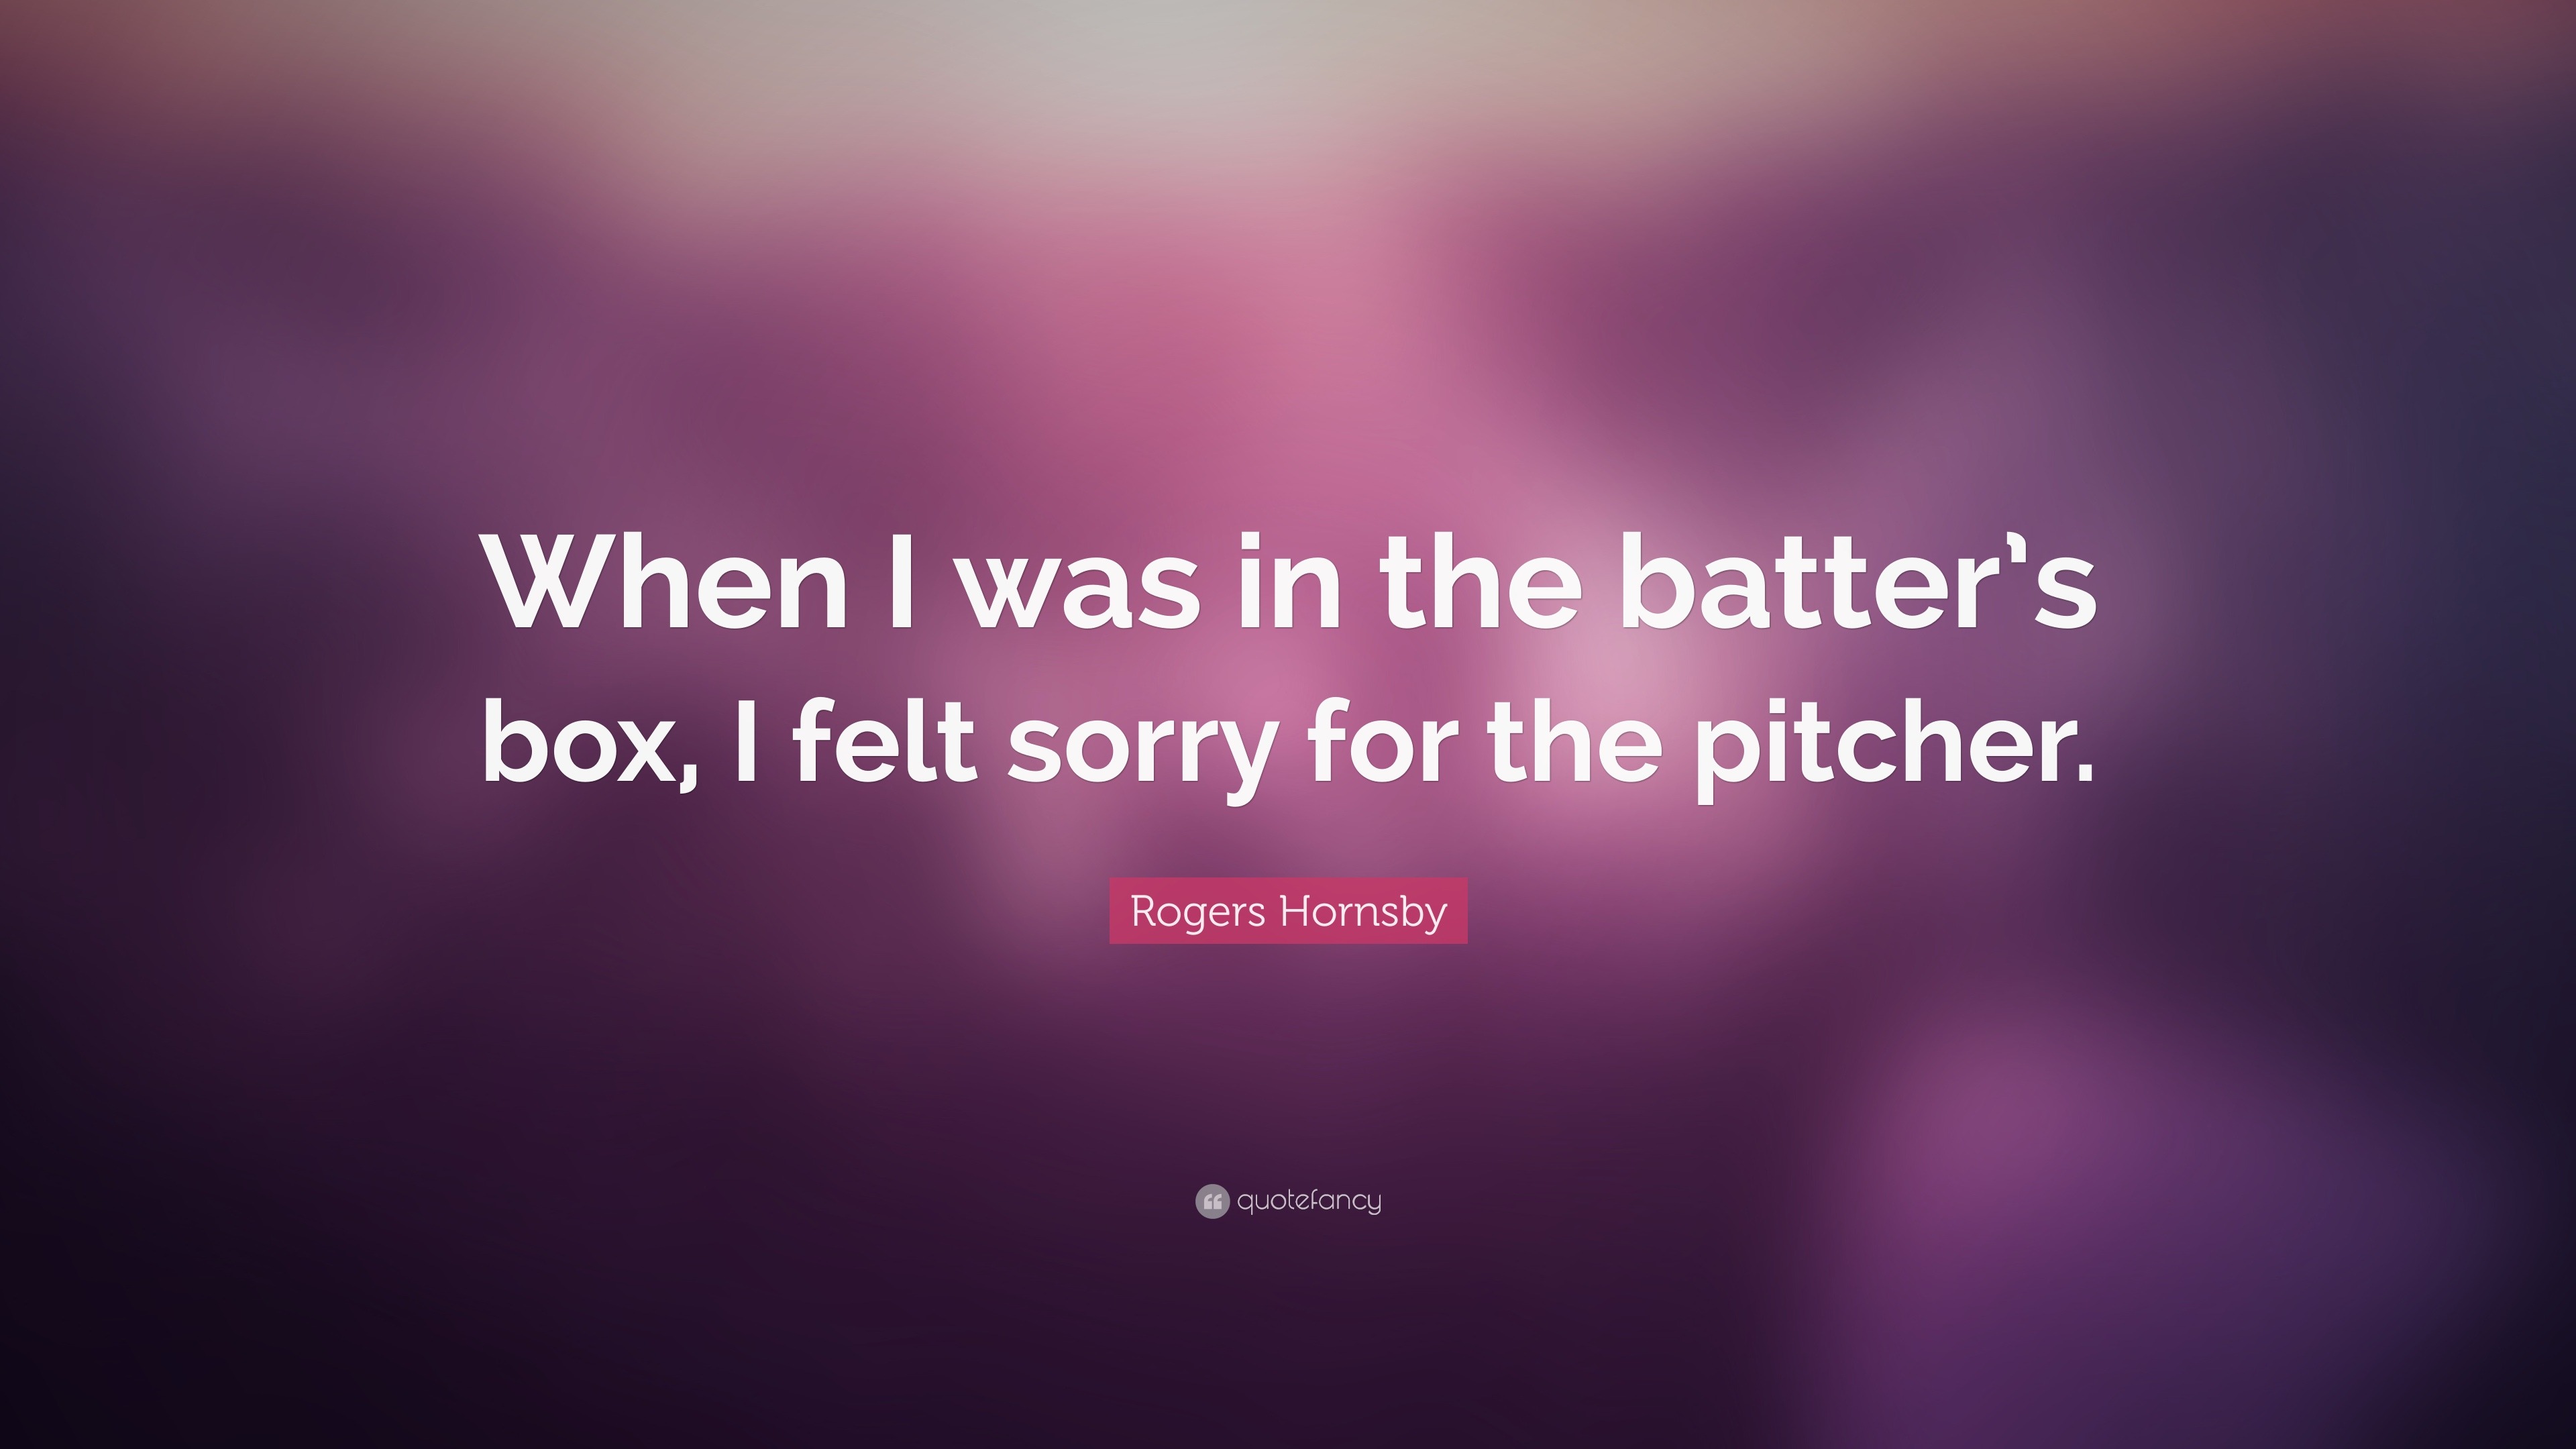 Rogers Hornsby Quotes (19 wallpapers) - Quotefancy